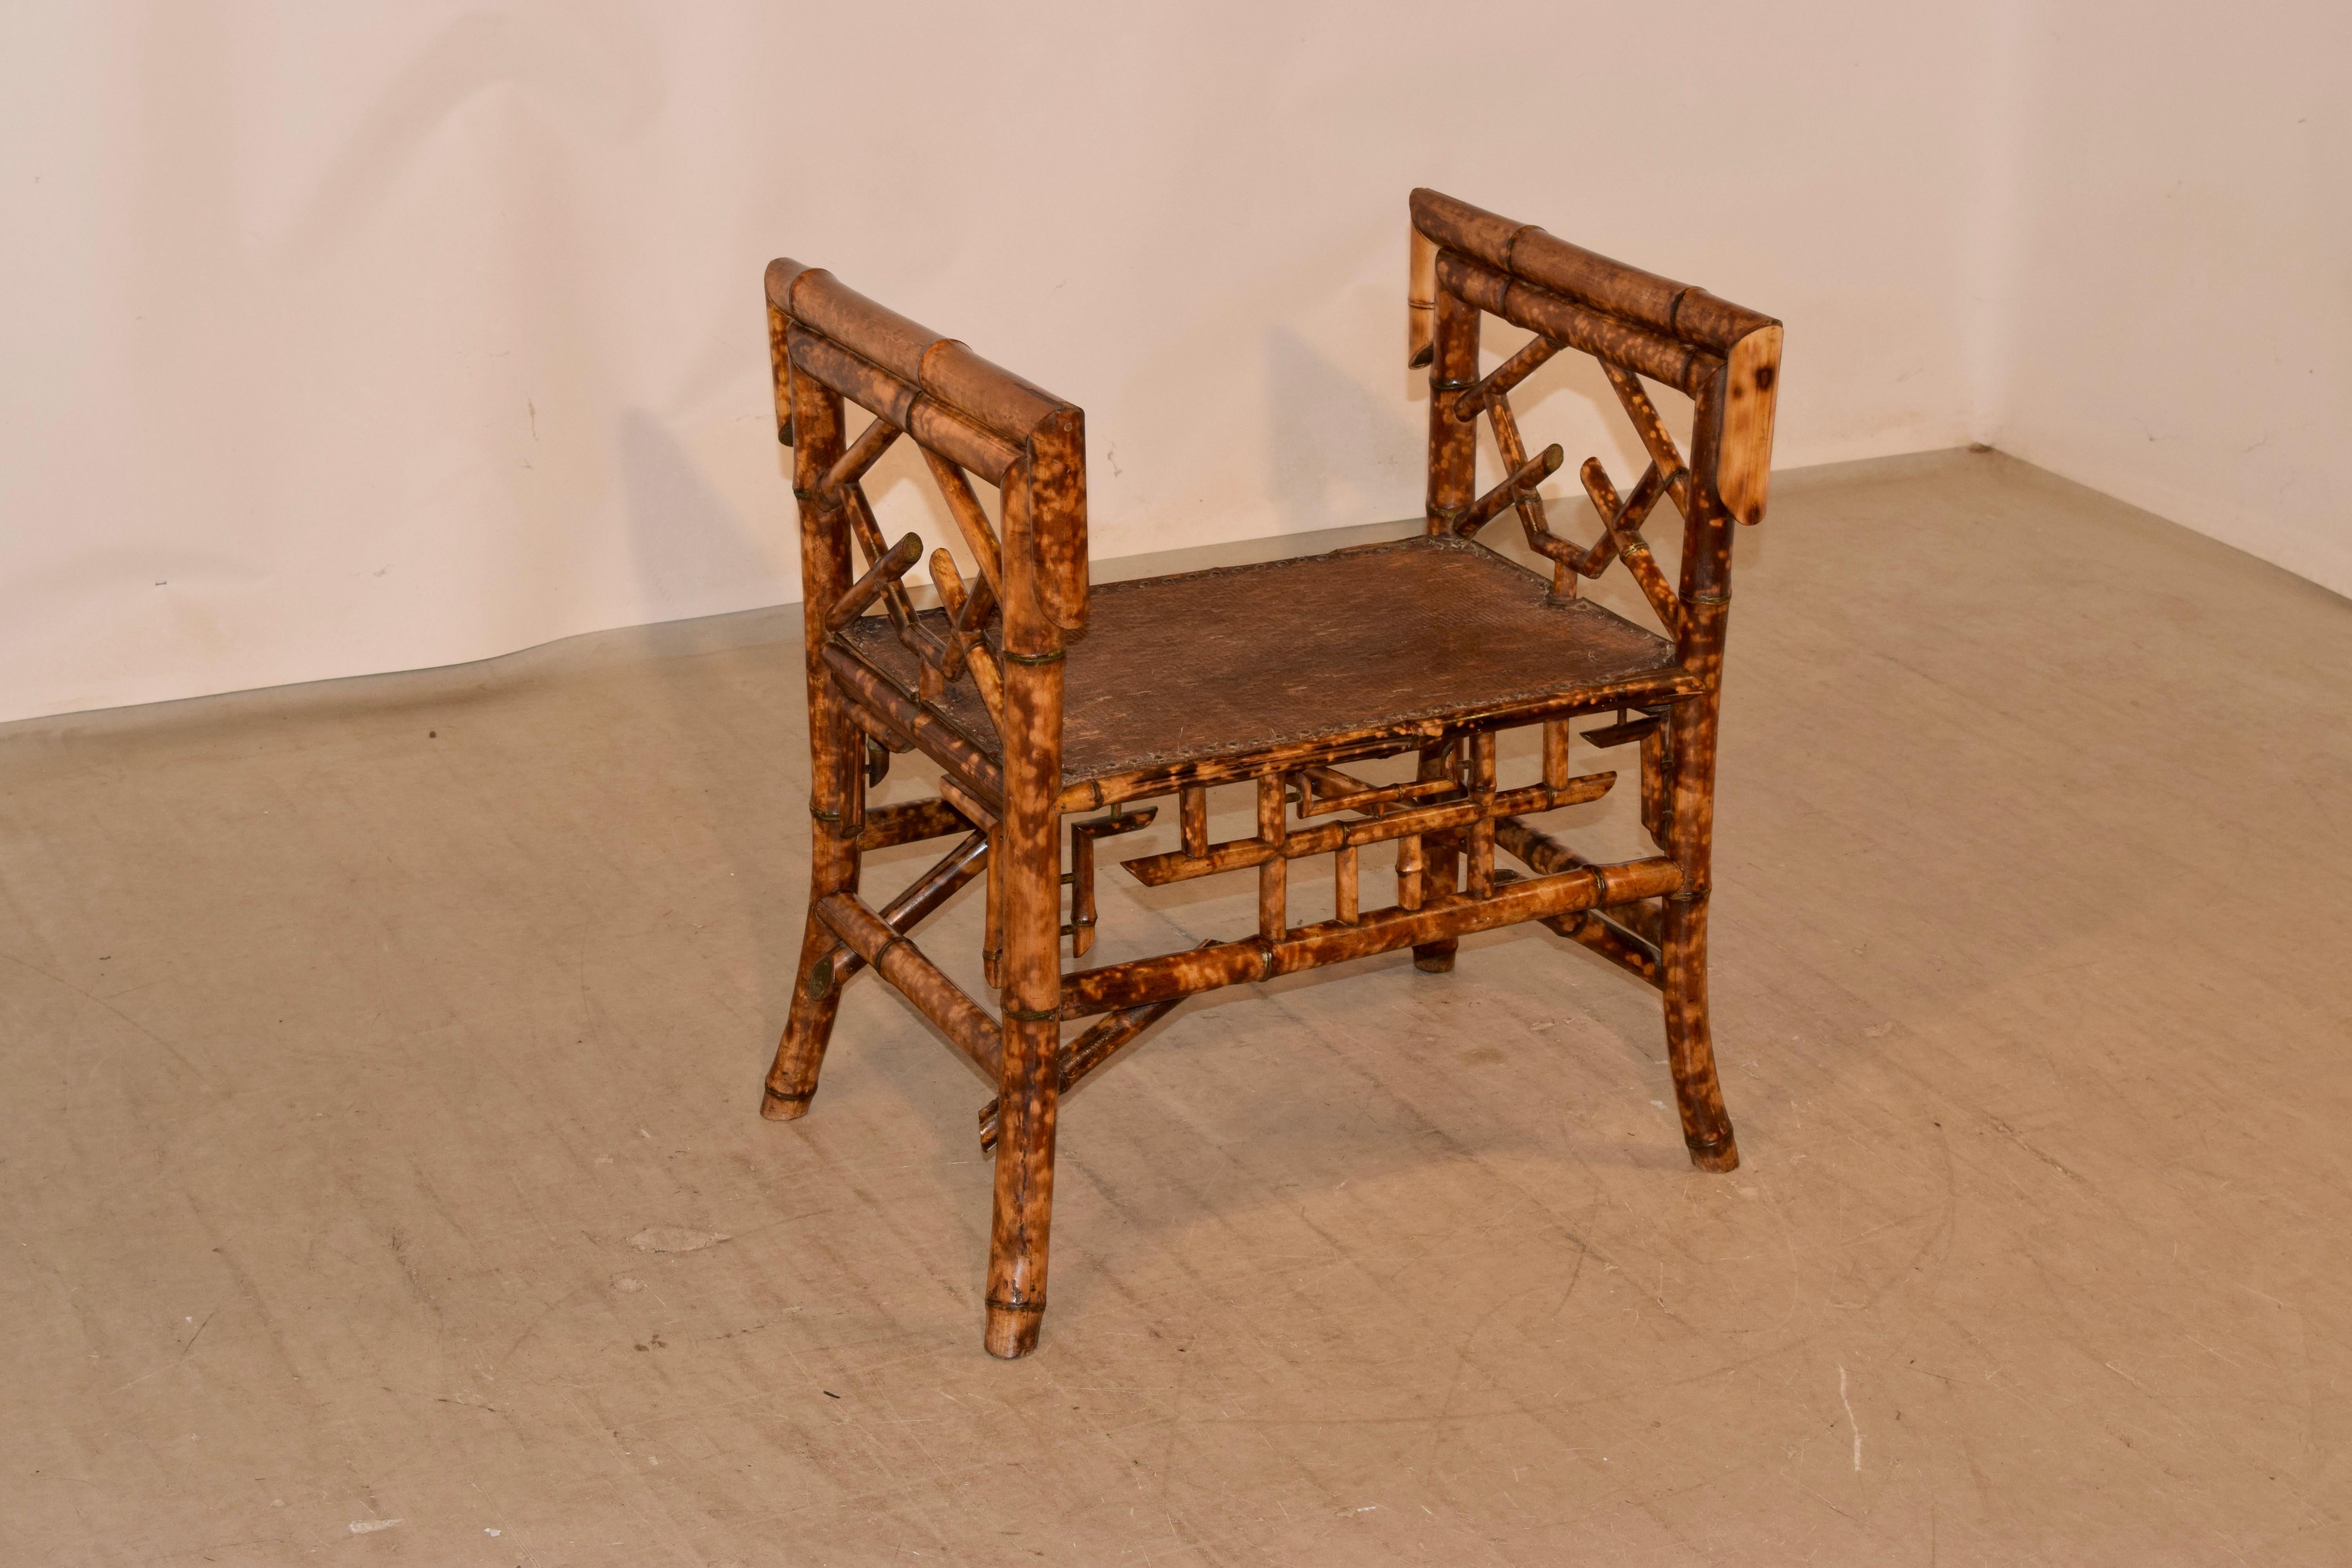 Late 19th century tortoise bamboo bench with arms from France. The arms are made from thick bamboo and are decorated in a Chinese Chippendale pattern, along with the aprons on the front and back of the bench. The seat is made from the original rush,